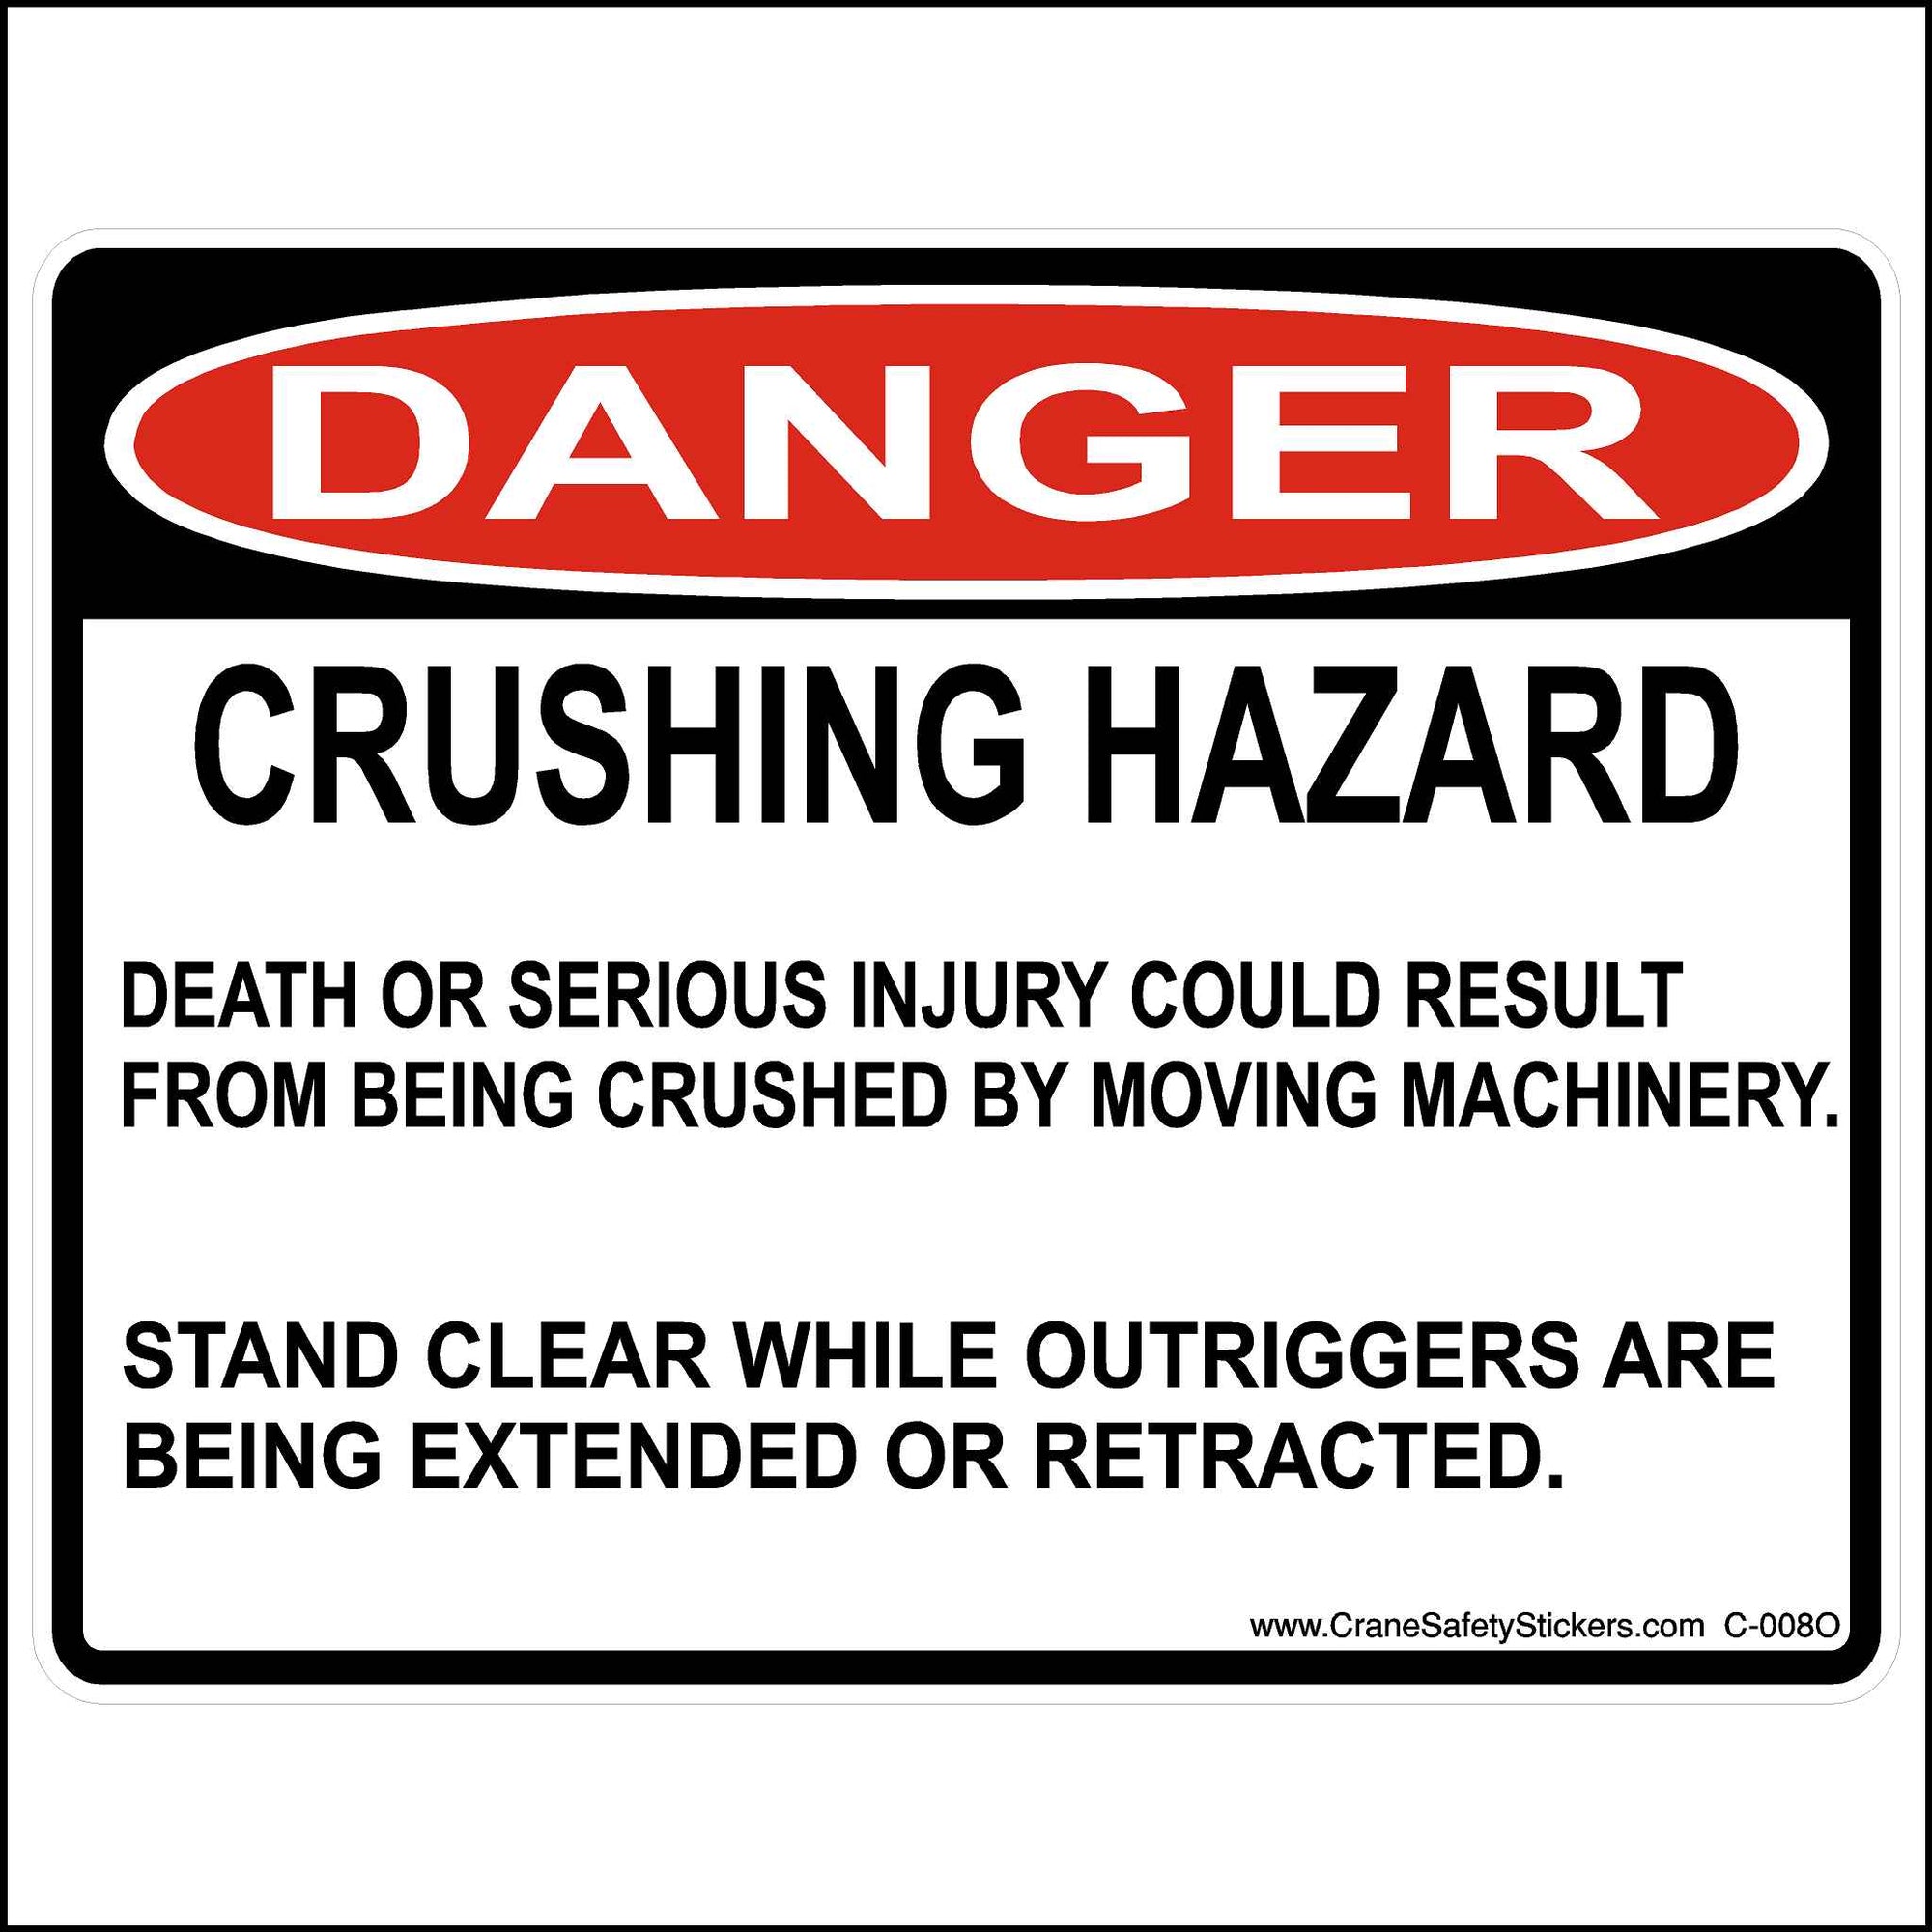 OSHA Outrigger Safety Sticker Stand Clear While Outriggers Are Being Extended or Retracted.